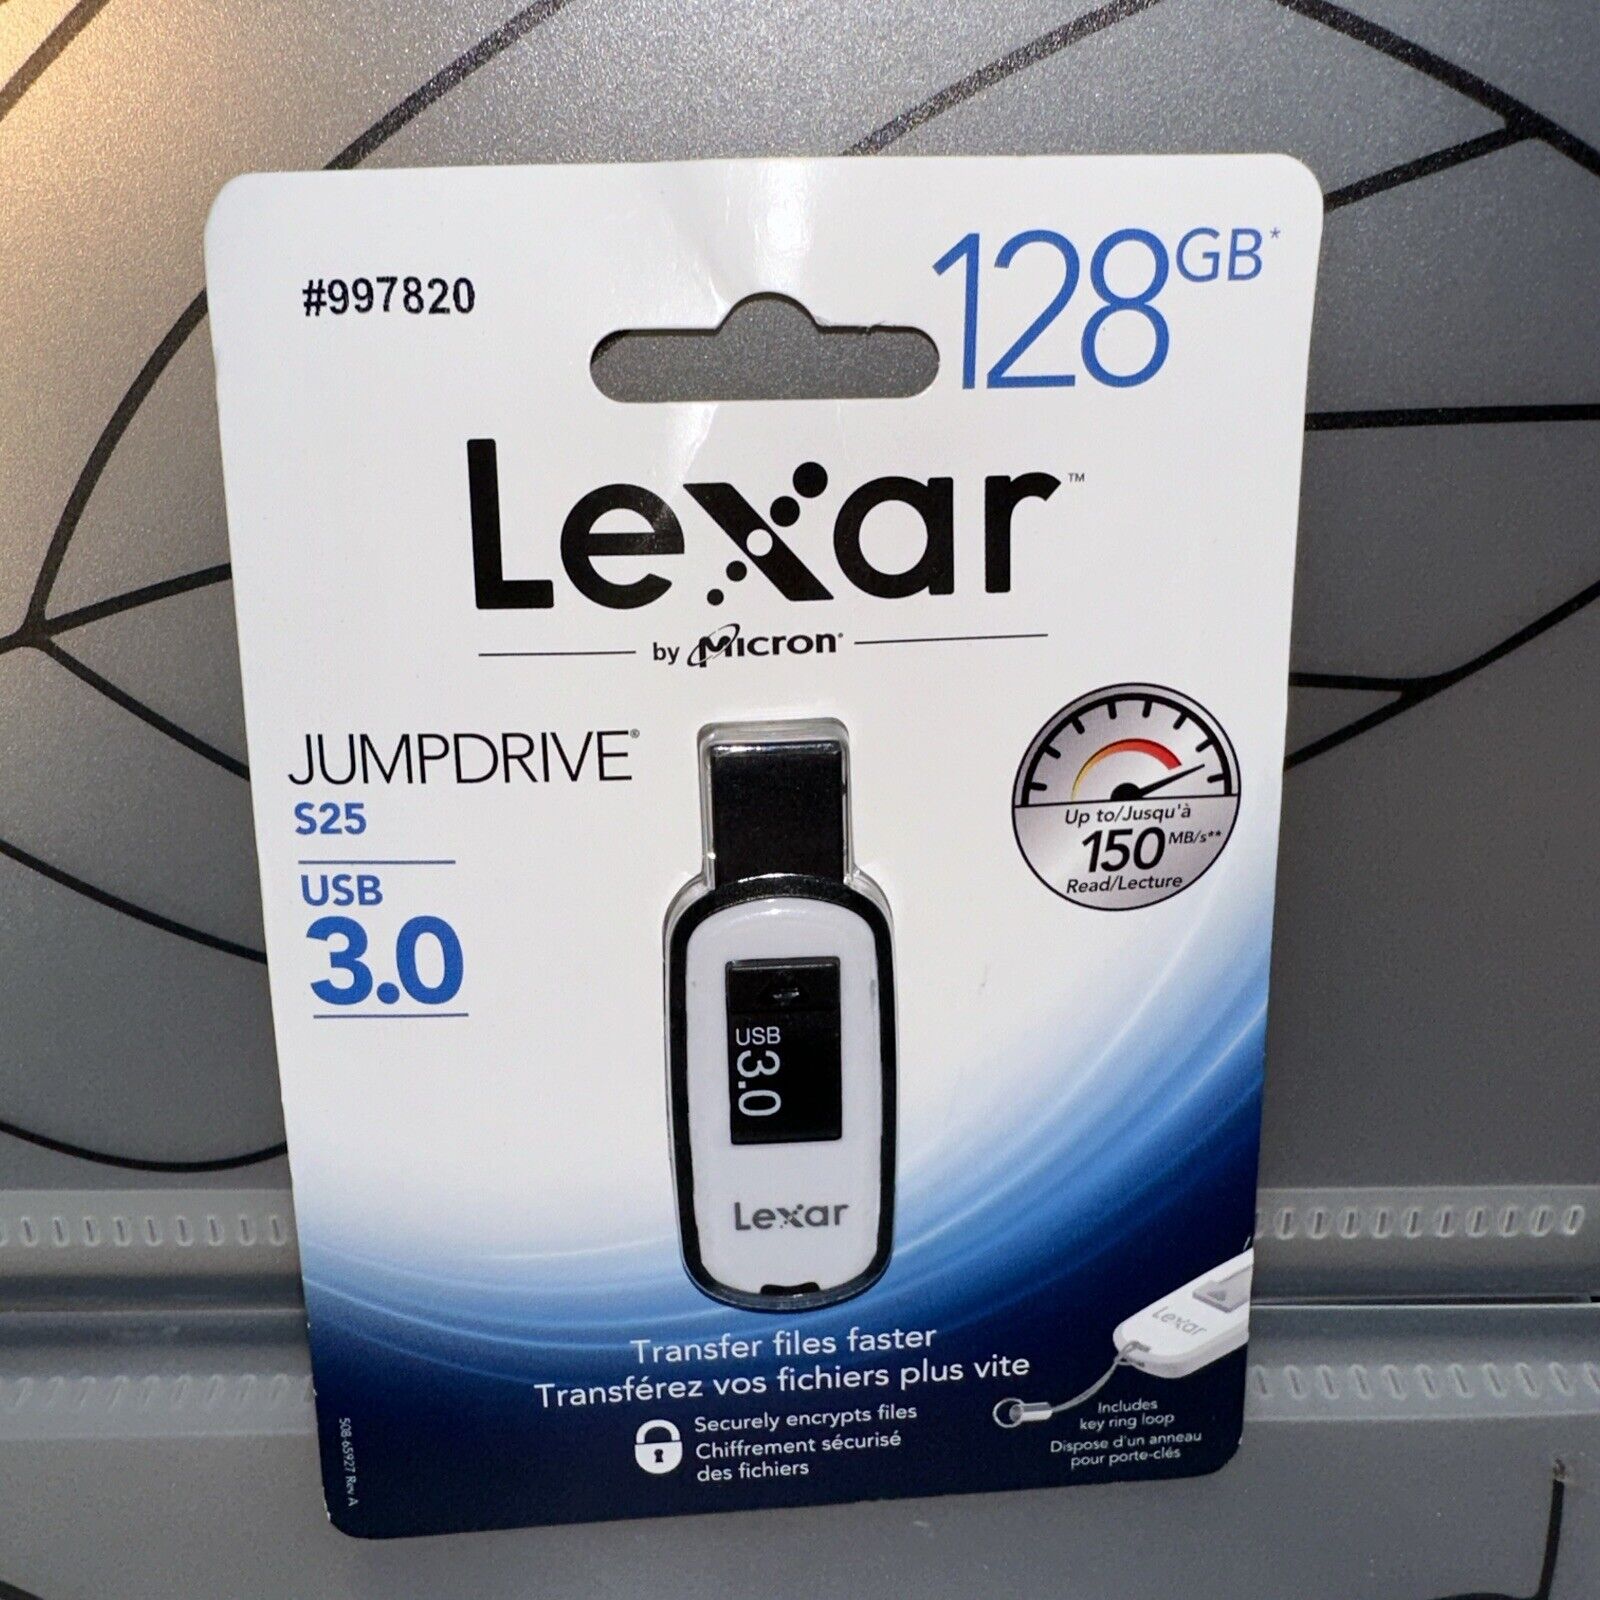 Lexar 128 GB JUMPDRIVE S25 USB 3.0 Brand New Unopened Package White and Black